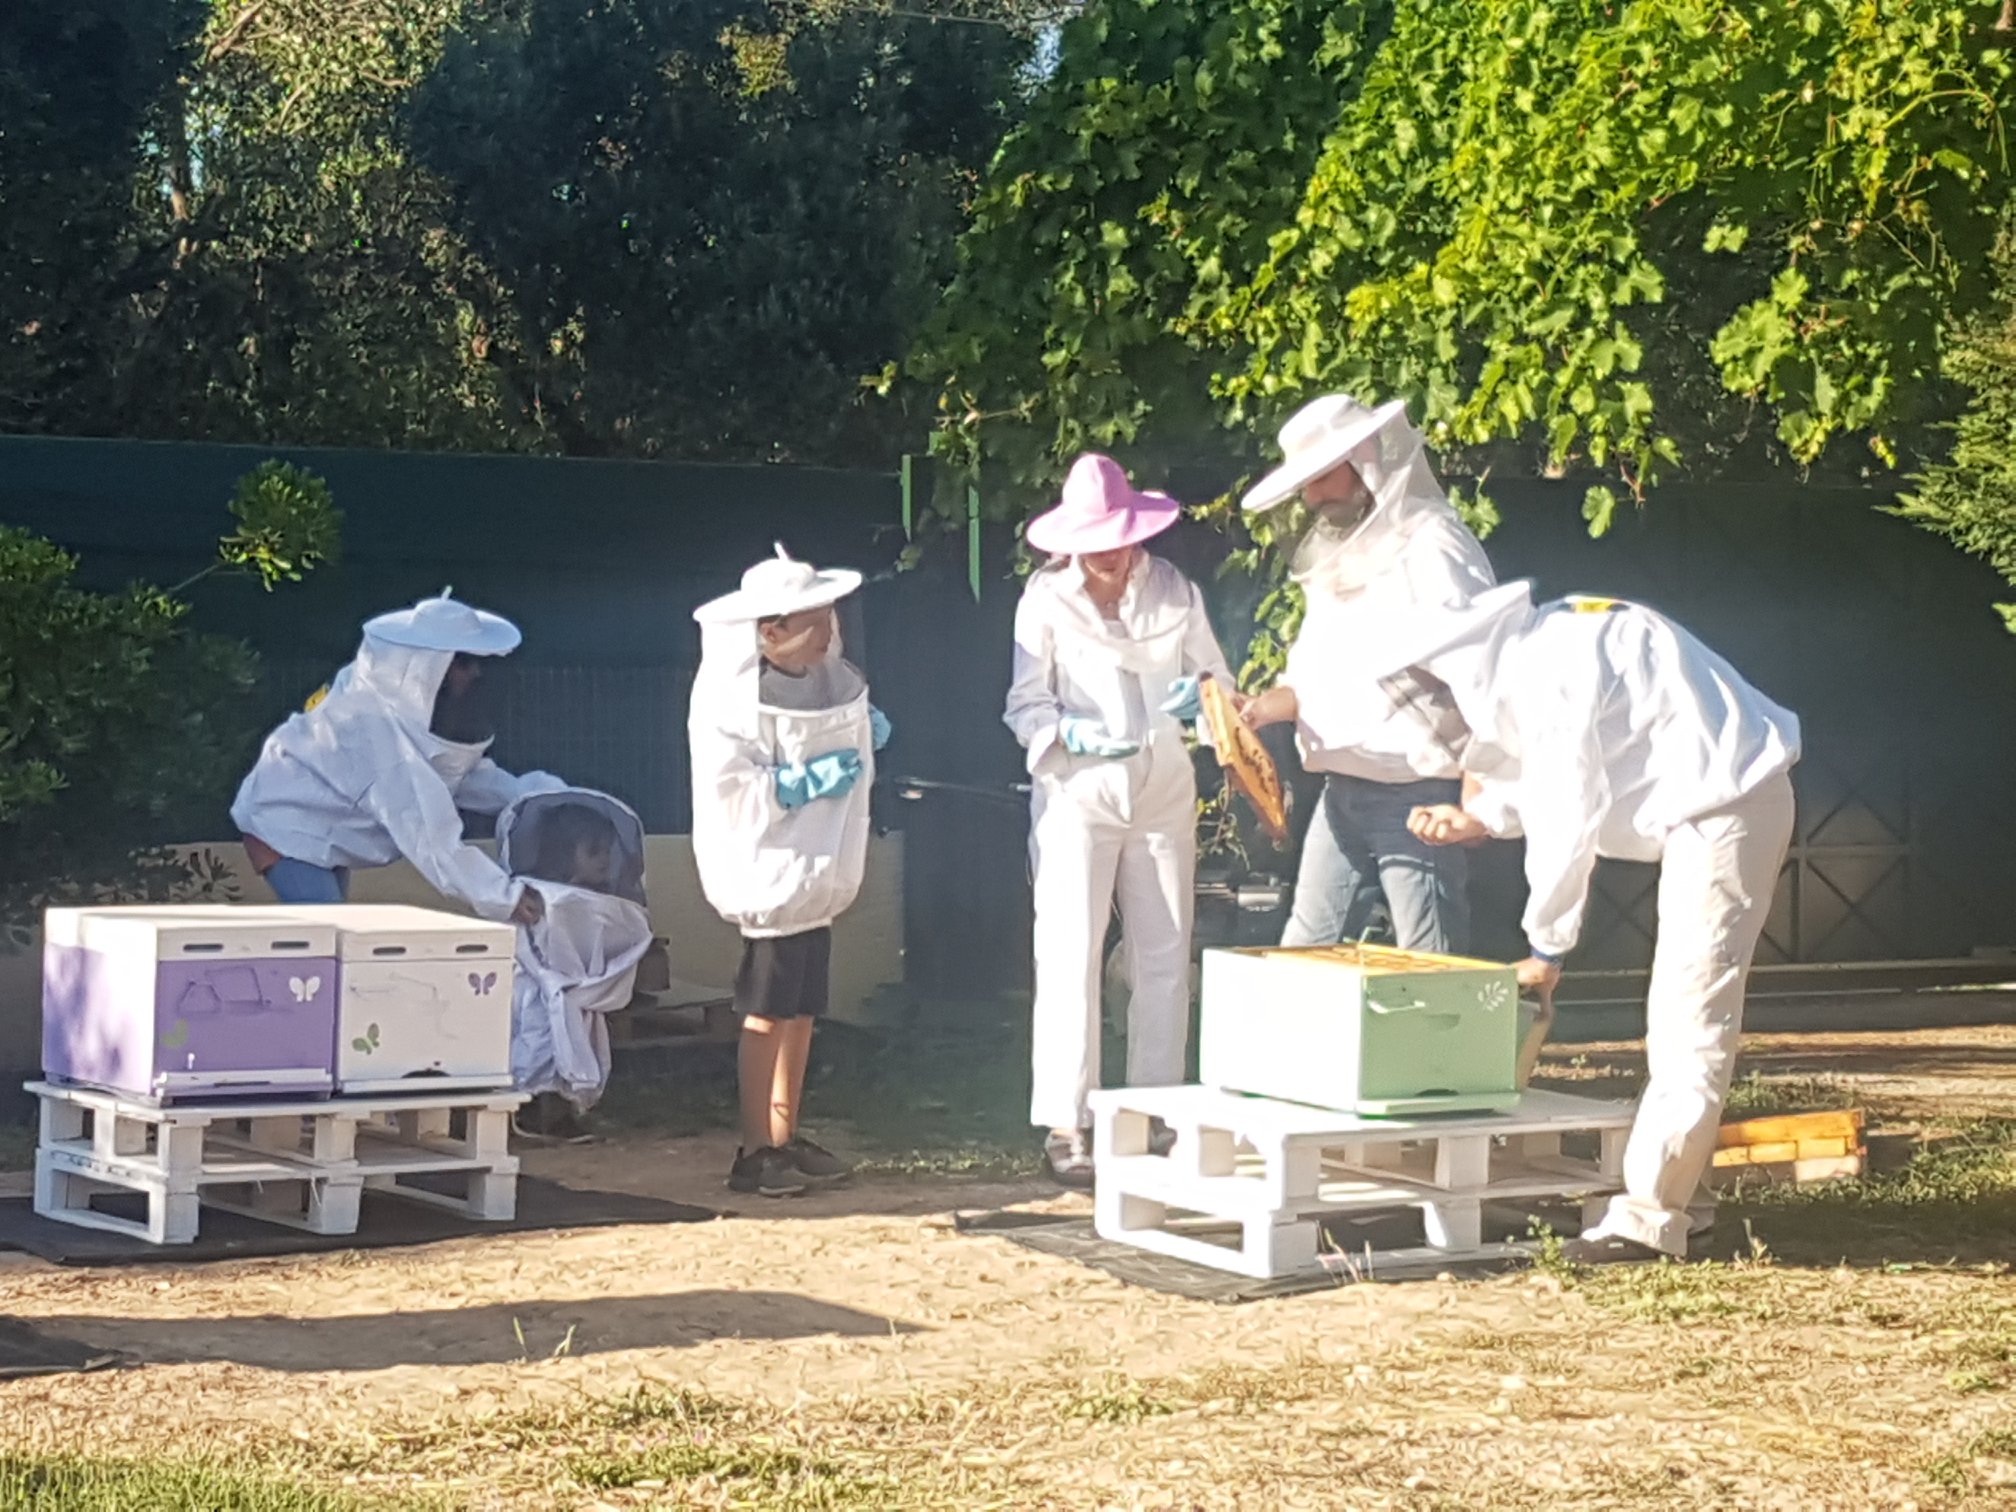 Open Farm Days 2021 | From A to Bee ΚοινΣΕπ , Παλλήνη, 26/9